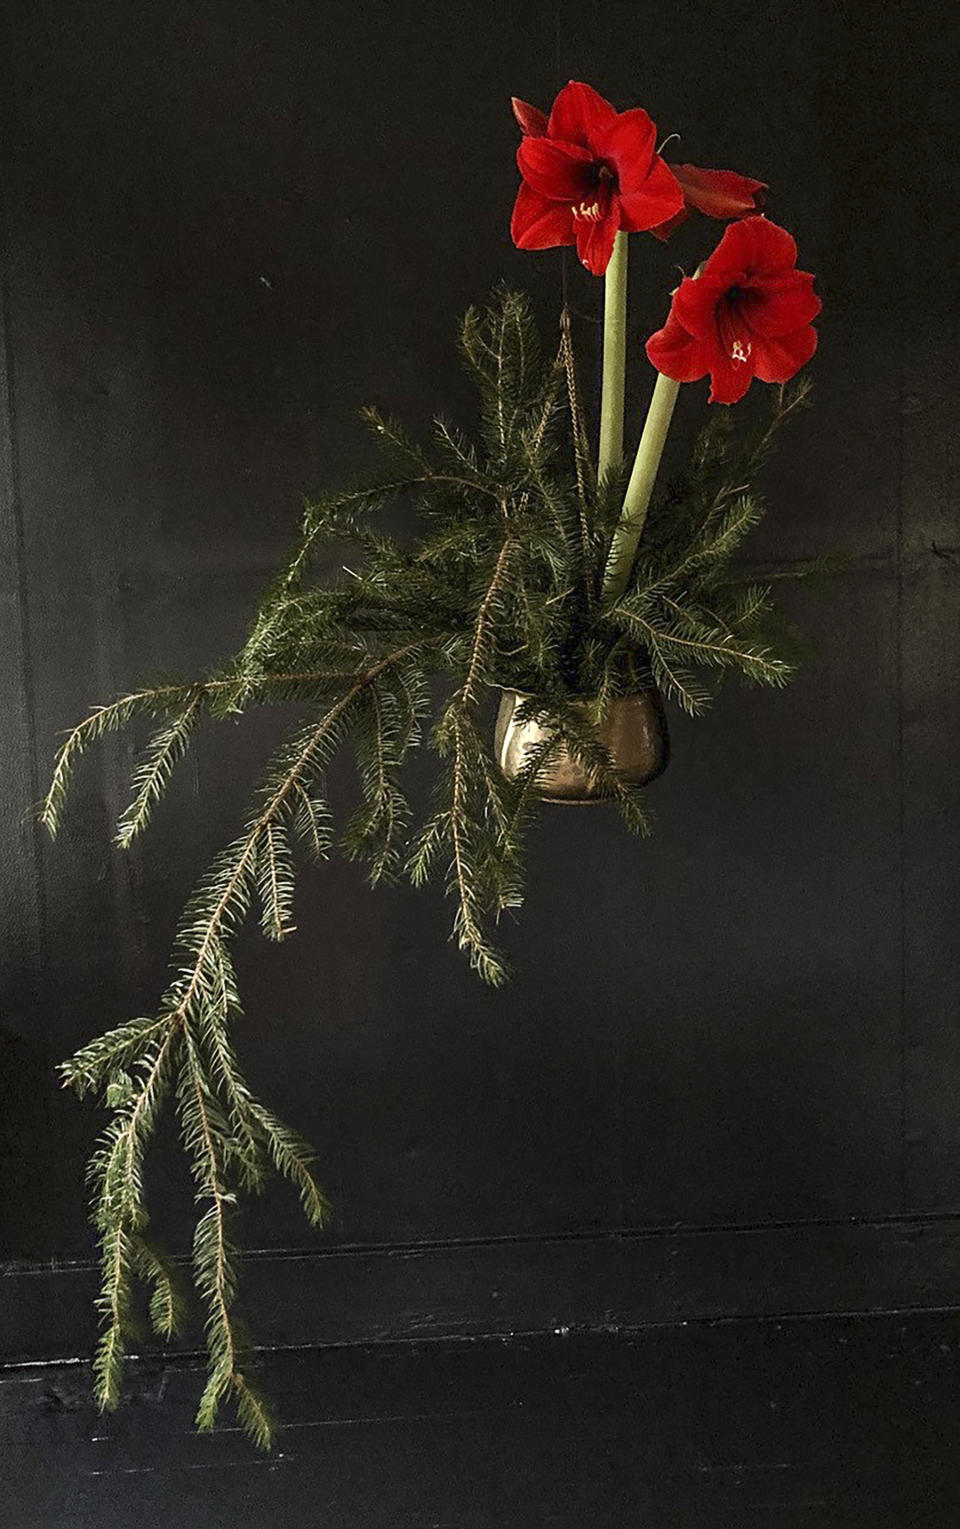 This image provided by Todd Carr shows an amaryllis in a hanging planter. Todd Carr, designer and co-owner of the Freehold, NY shop Hort & Pott, says, "Put a potted amaryllis in a hanging planter, and fill the base with evergreens for an uplighting, magical arrangement that takes up little space. (Todd Carr via AP)